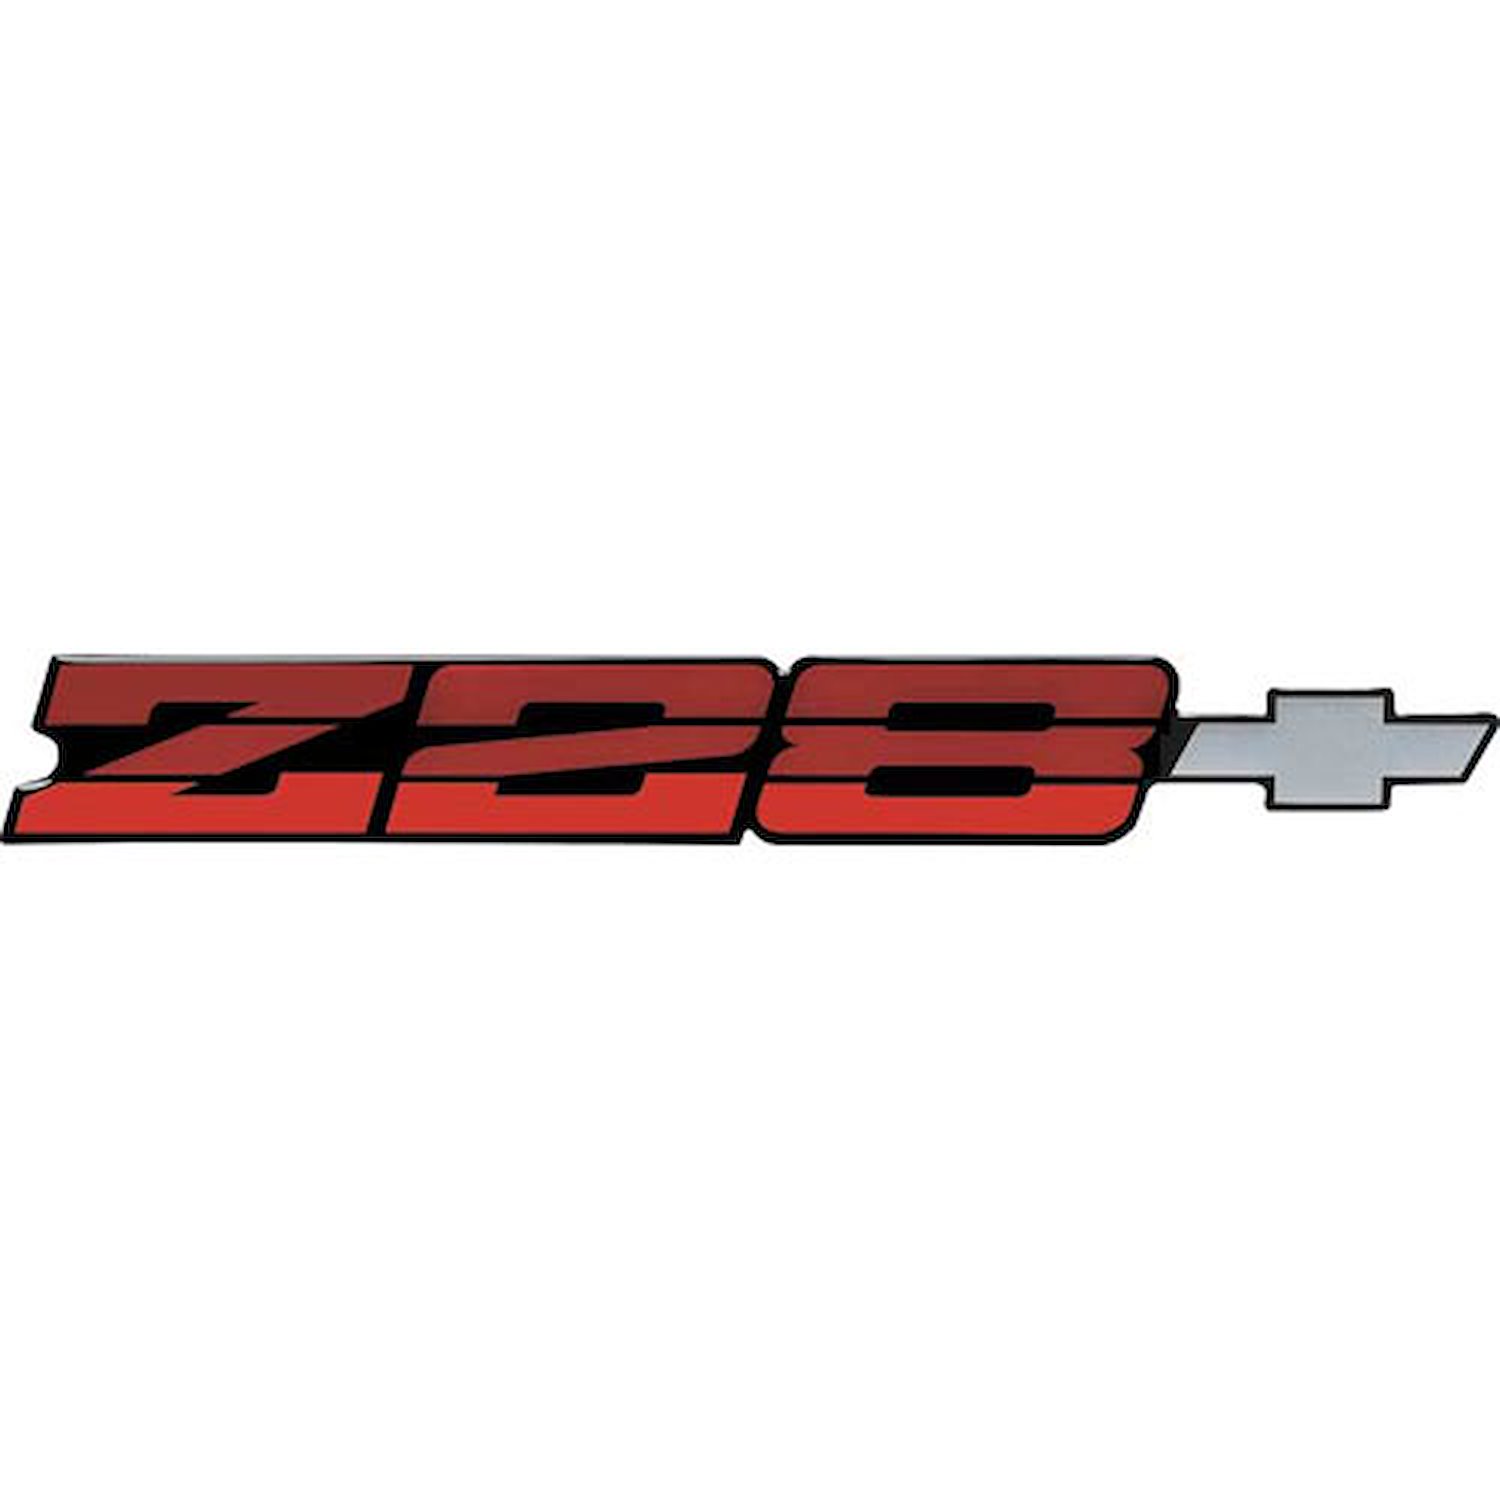 1982-84 Camaro Z28 Red Rear Panel Emblem with